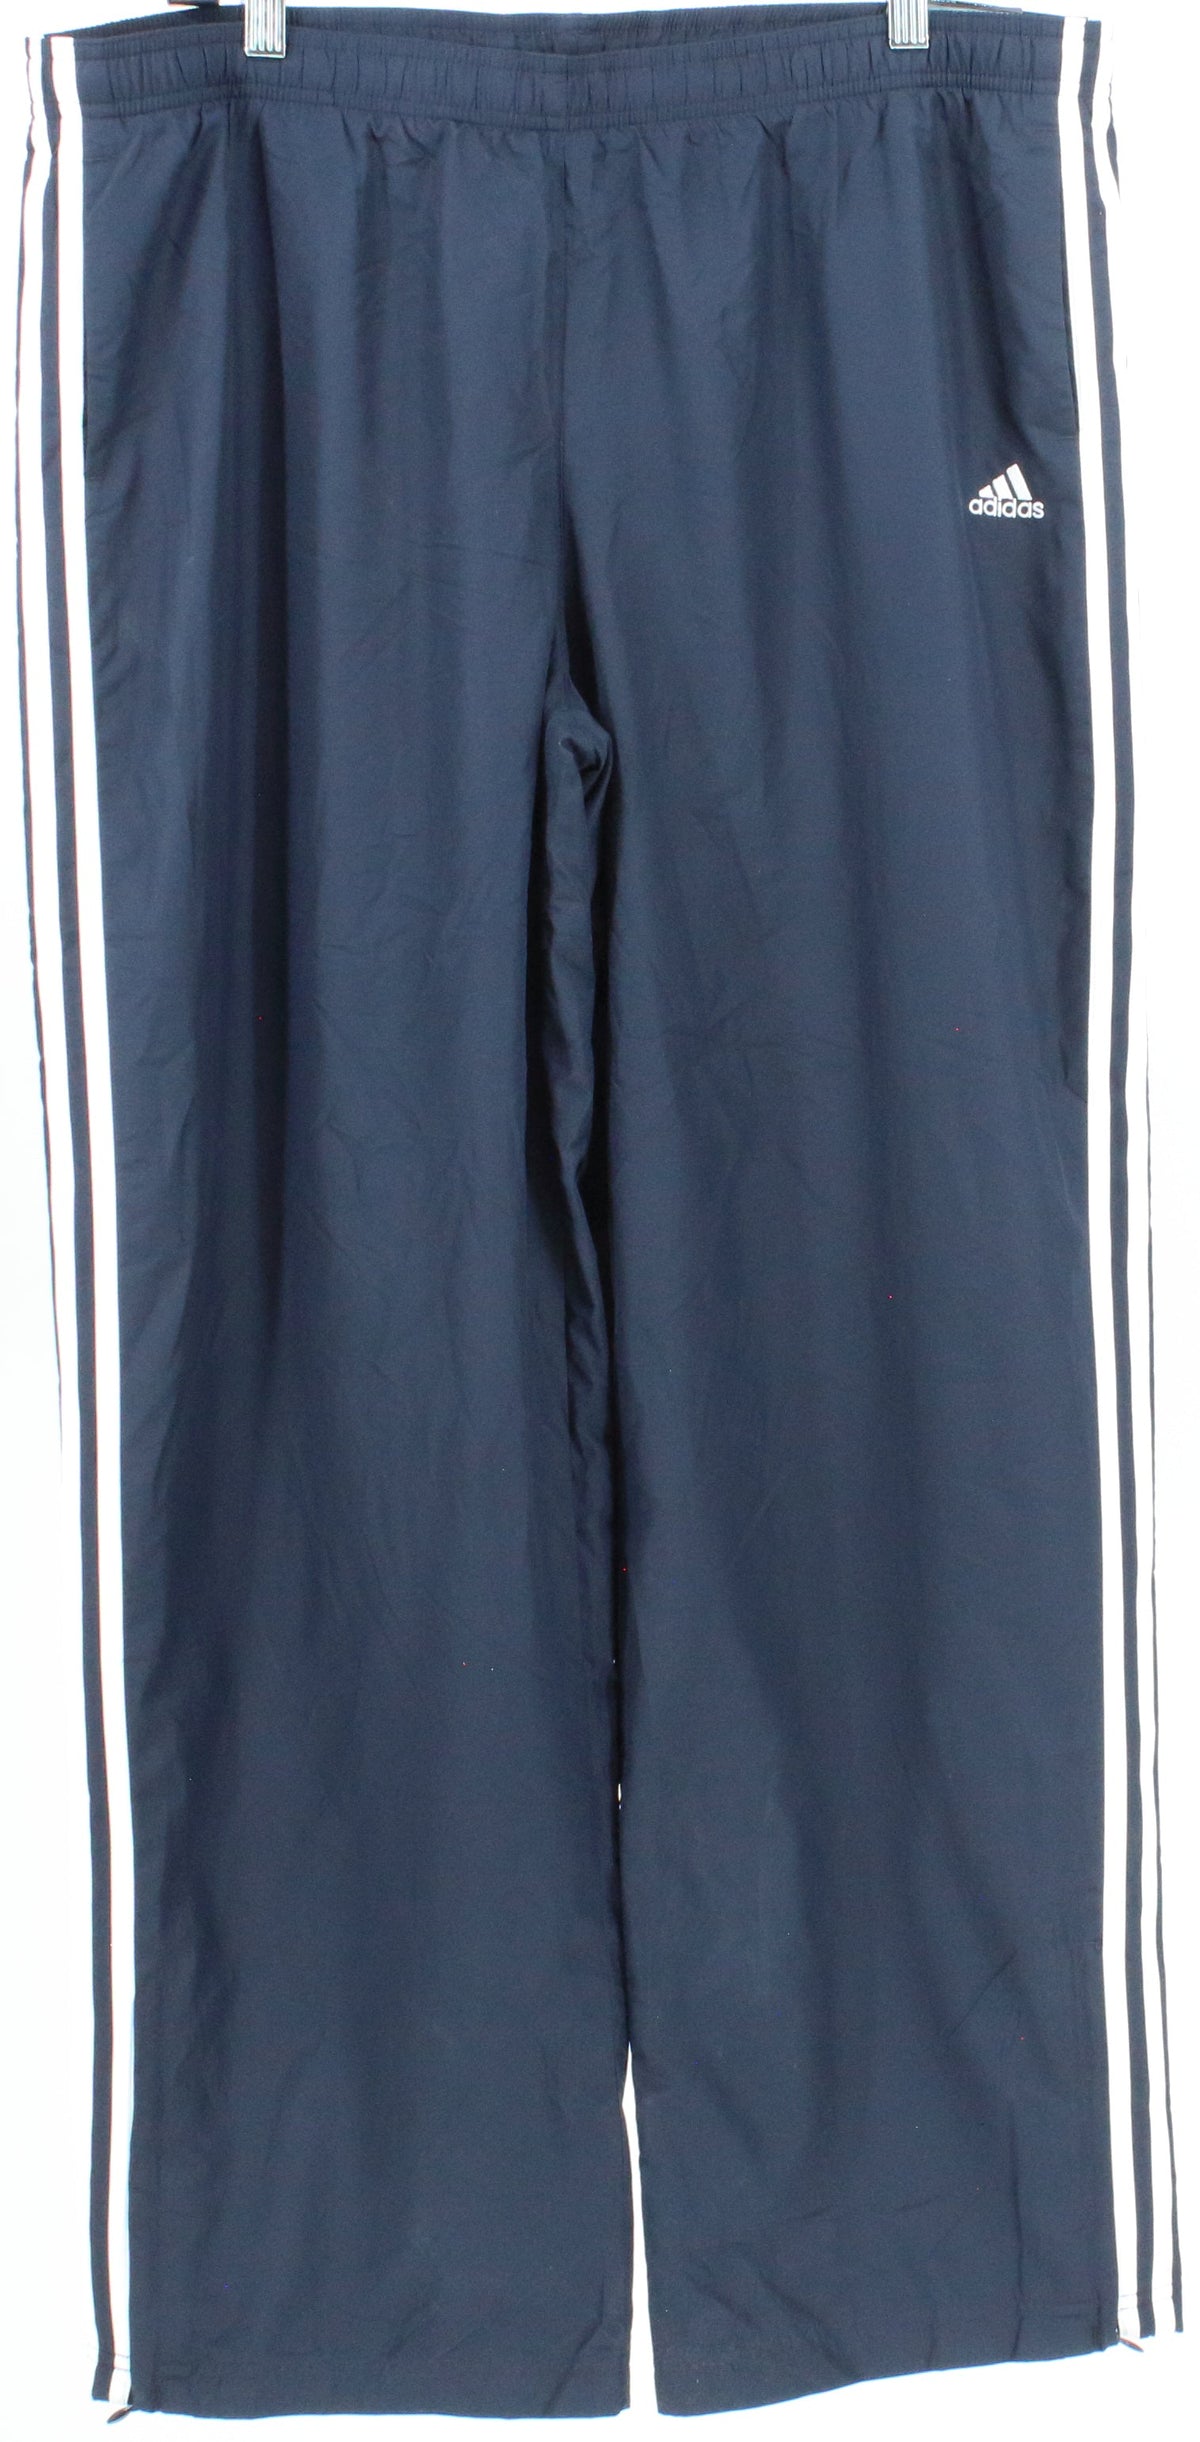 Adidas Navy Blue and White 3S Wind Pant